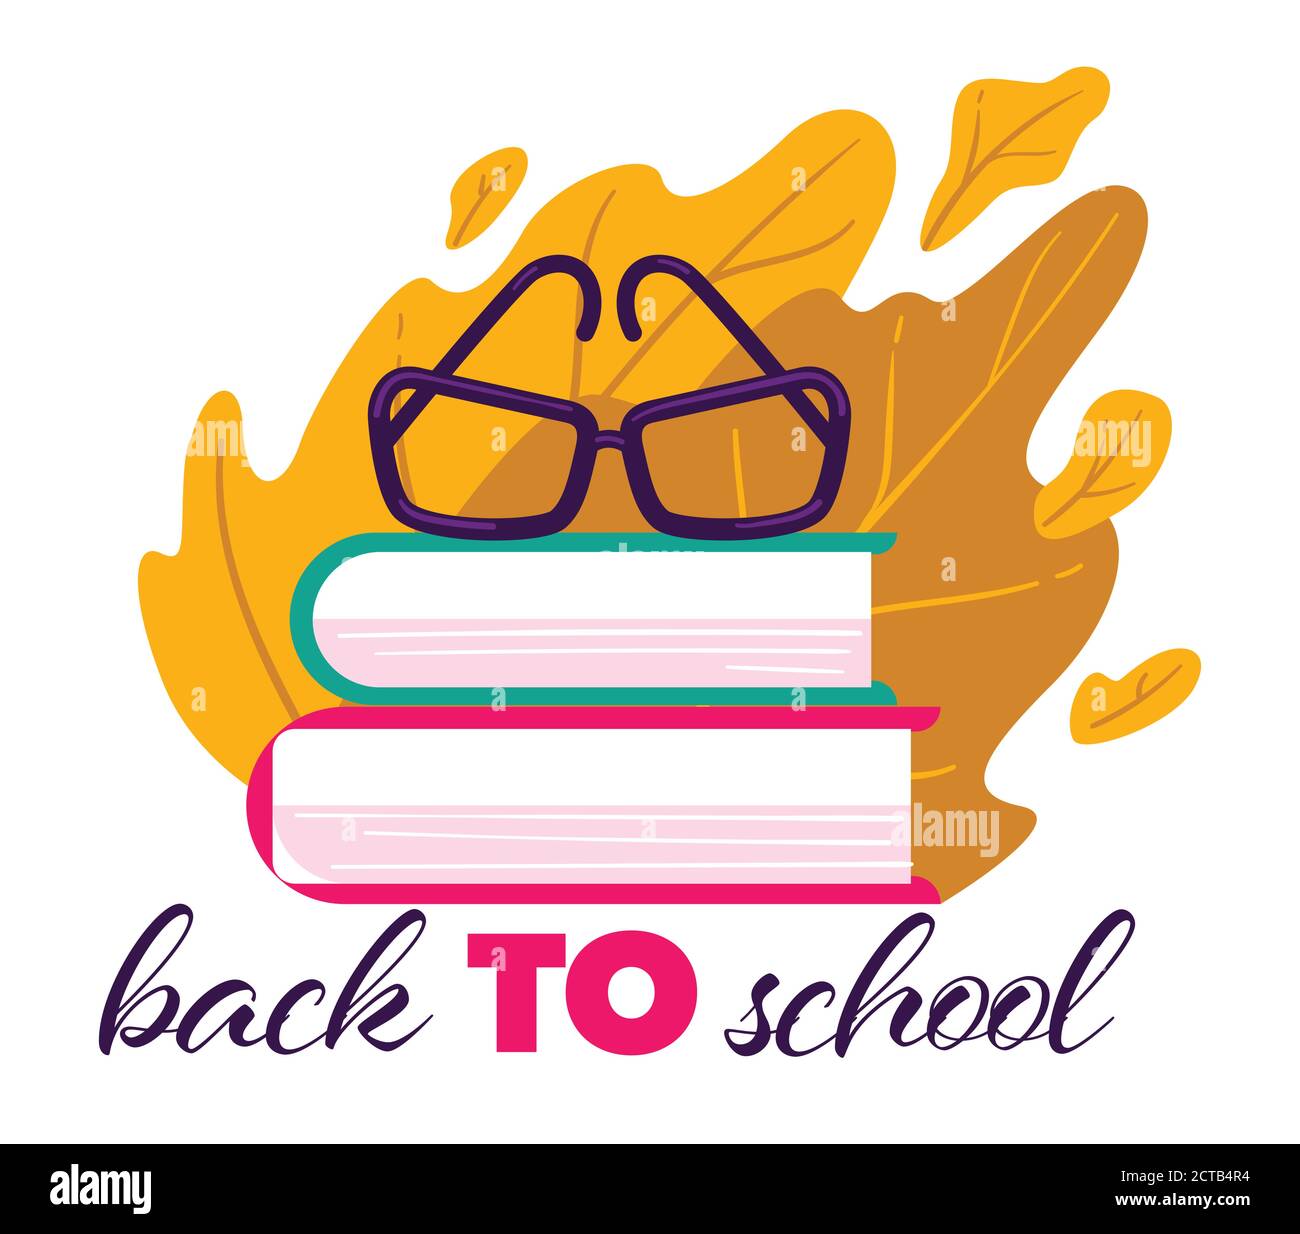 Back to school banner with books and dried leaves Stock Vector